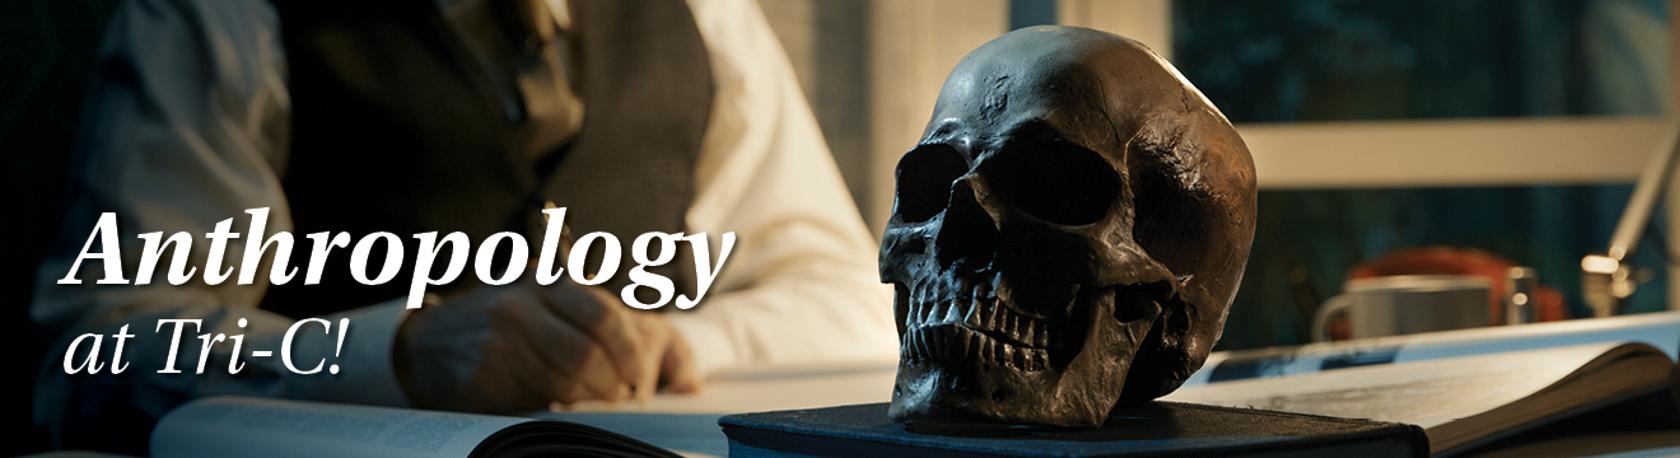 "Anthropology at Tri-C!" with image of human skull being studied.